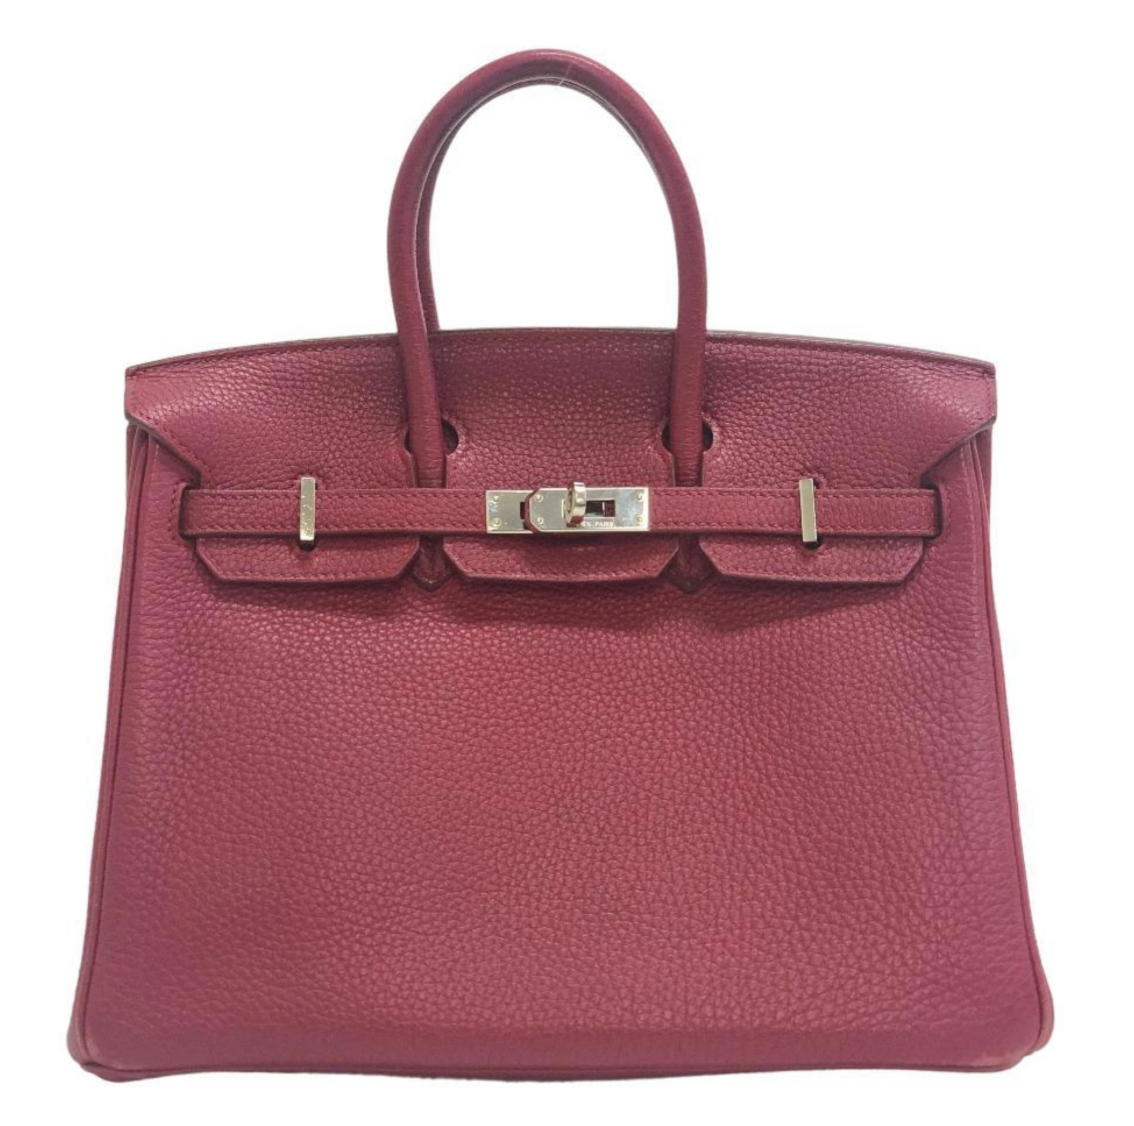 Pre-owned Hermes Birkin 25 in burgundy colour Togo leather with palladium hardware